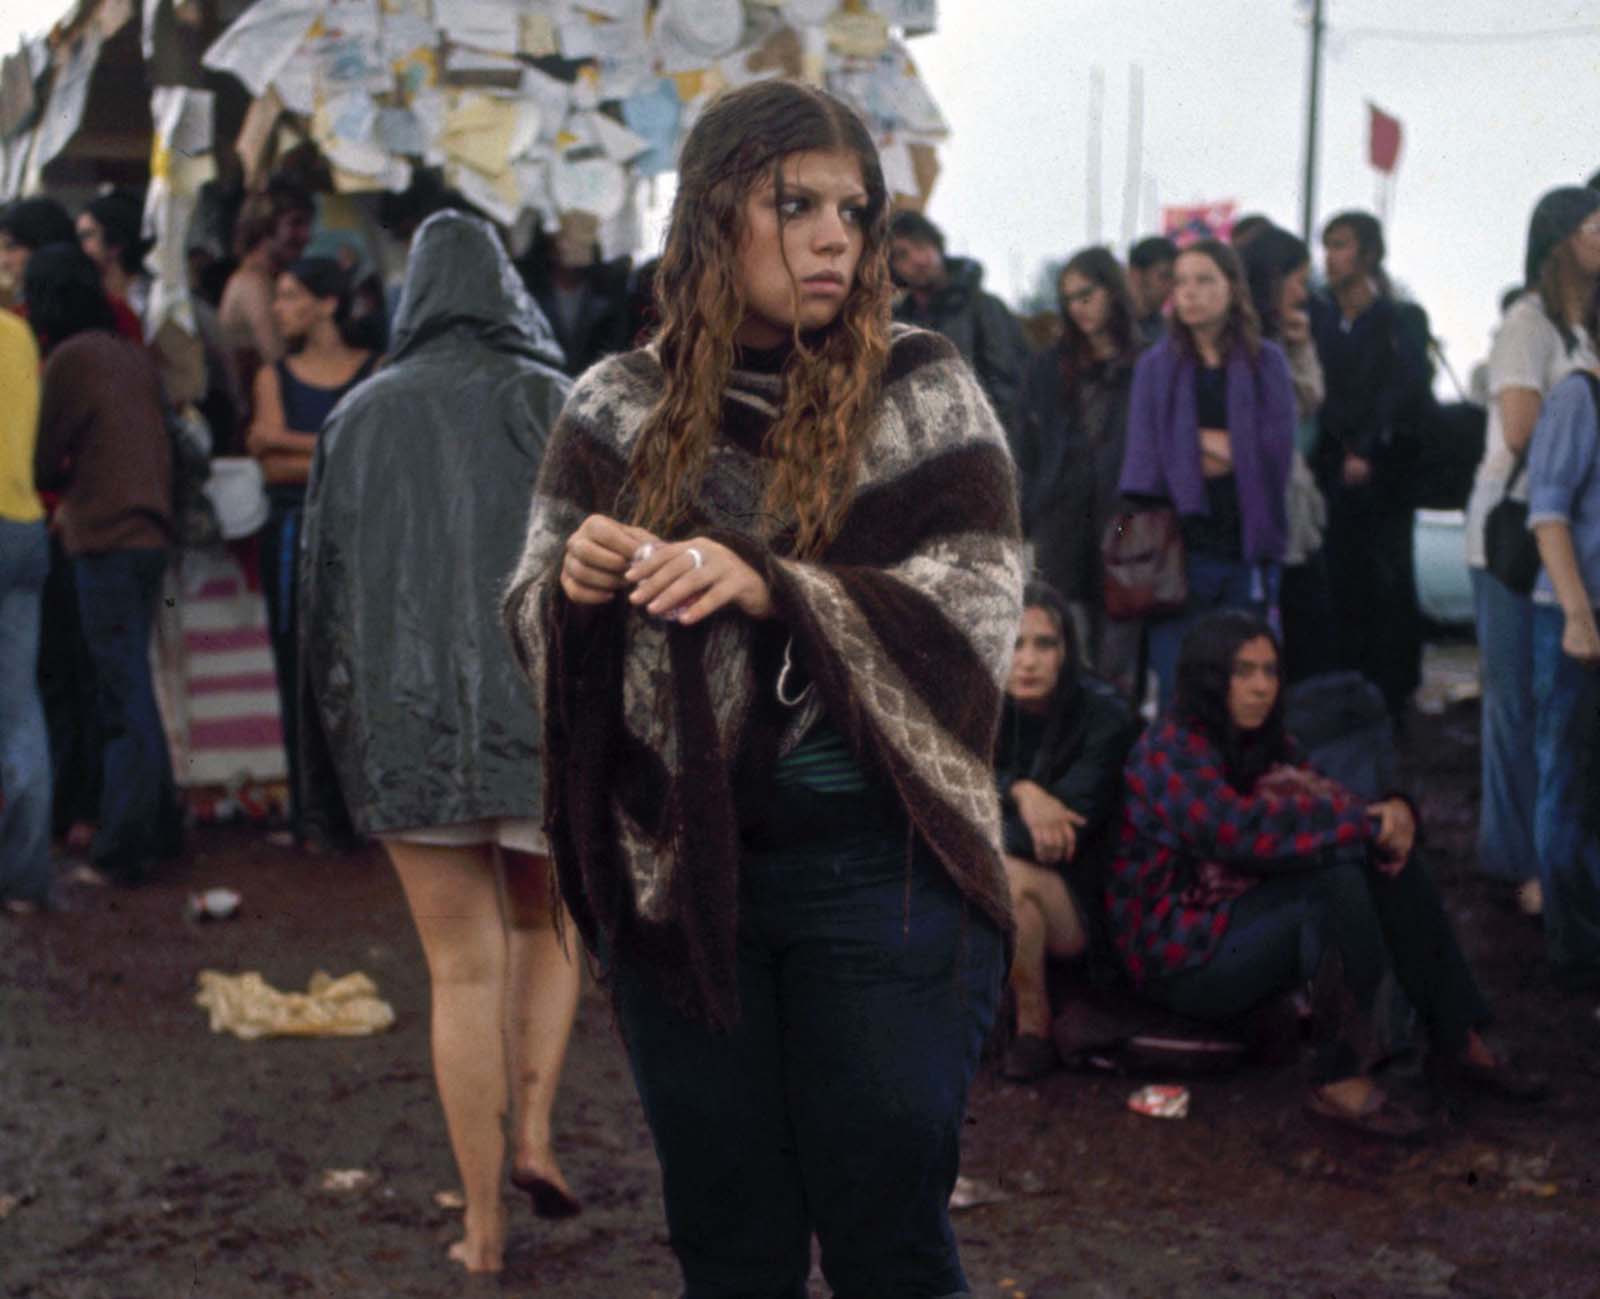 A bedraggled young woman stands in the mud on the grounds of the Woodstock Music & Art Fair.